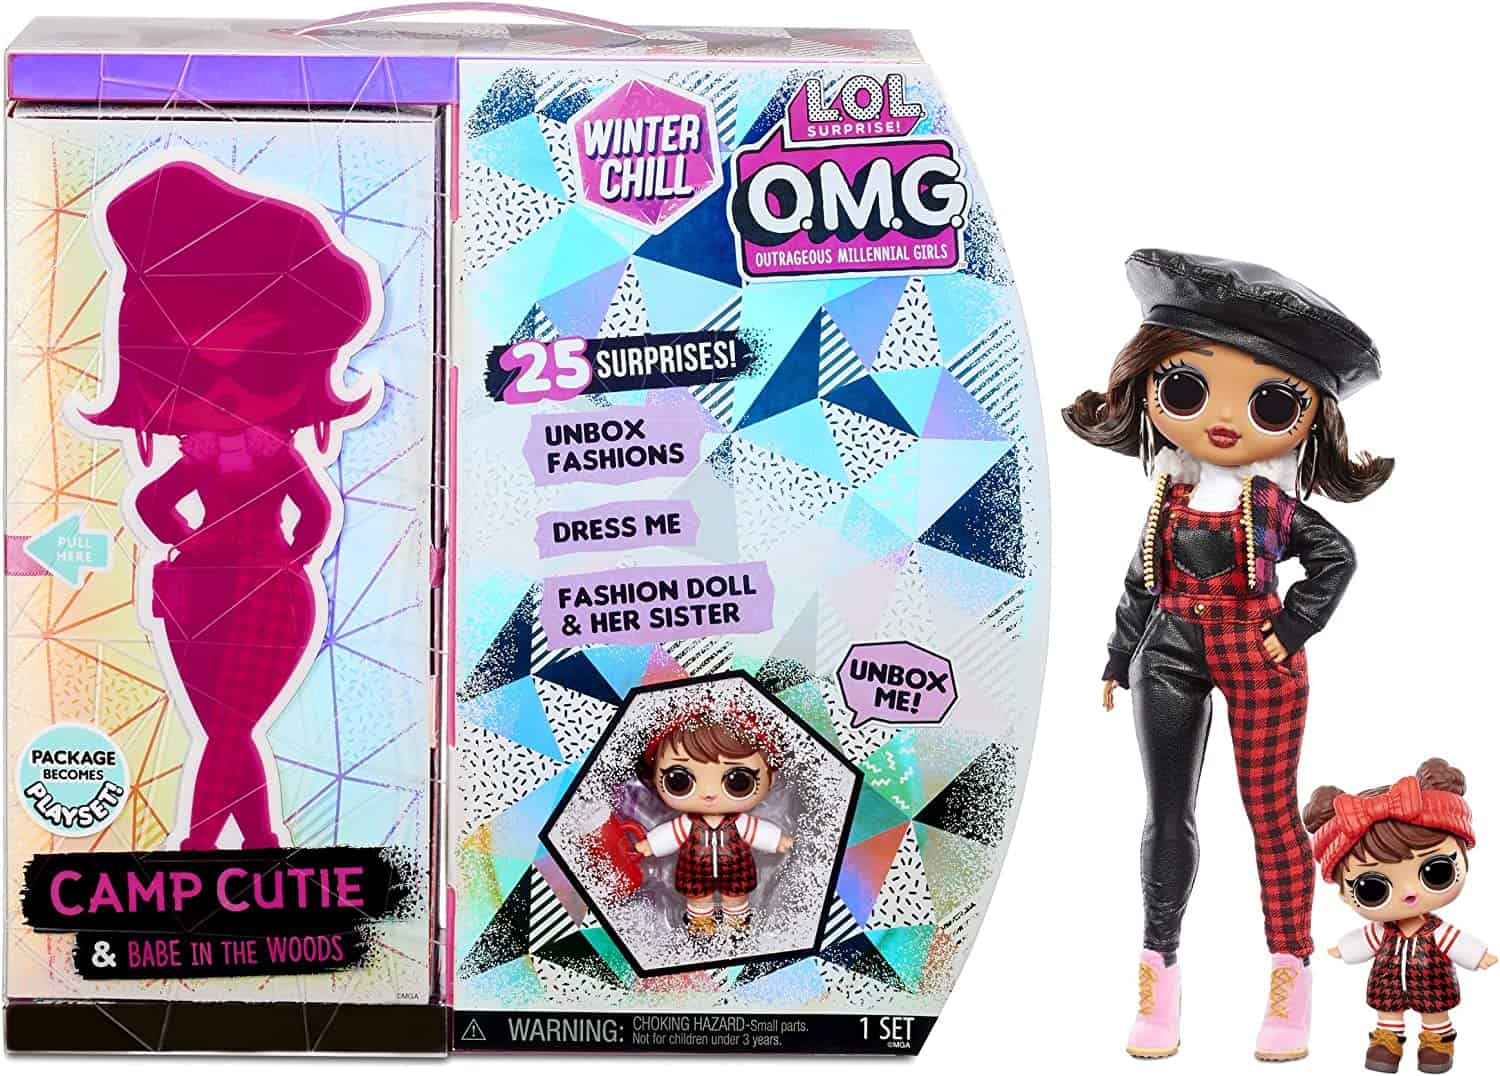  LOL Surprise OMG Winter Chill Camp Cutie Fashion Doll & Sister Babe